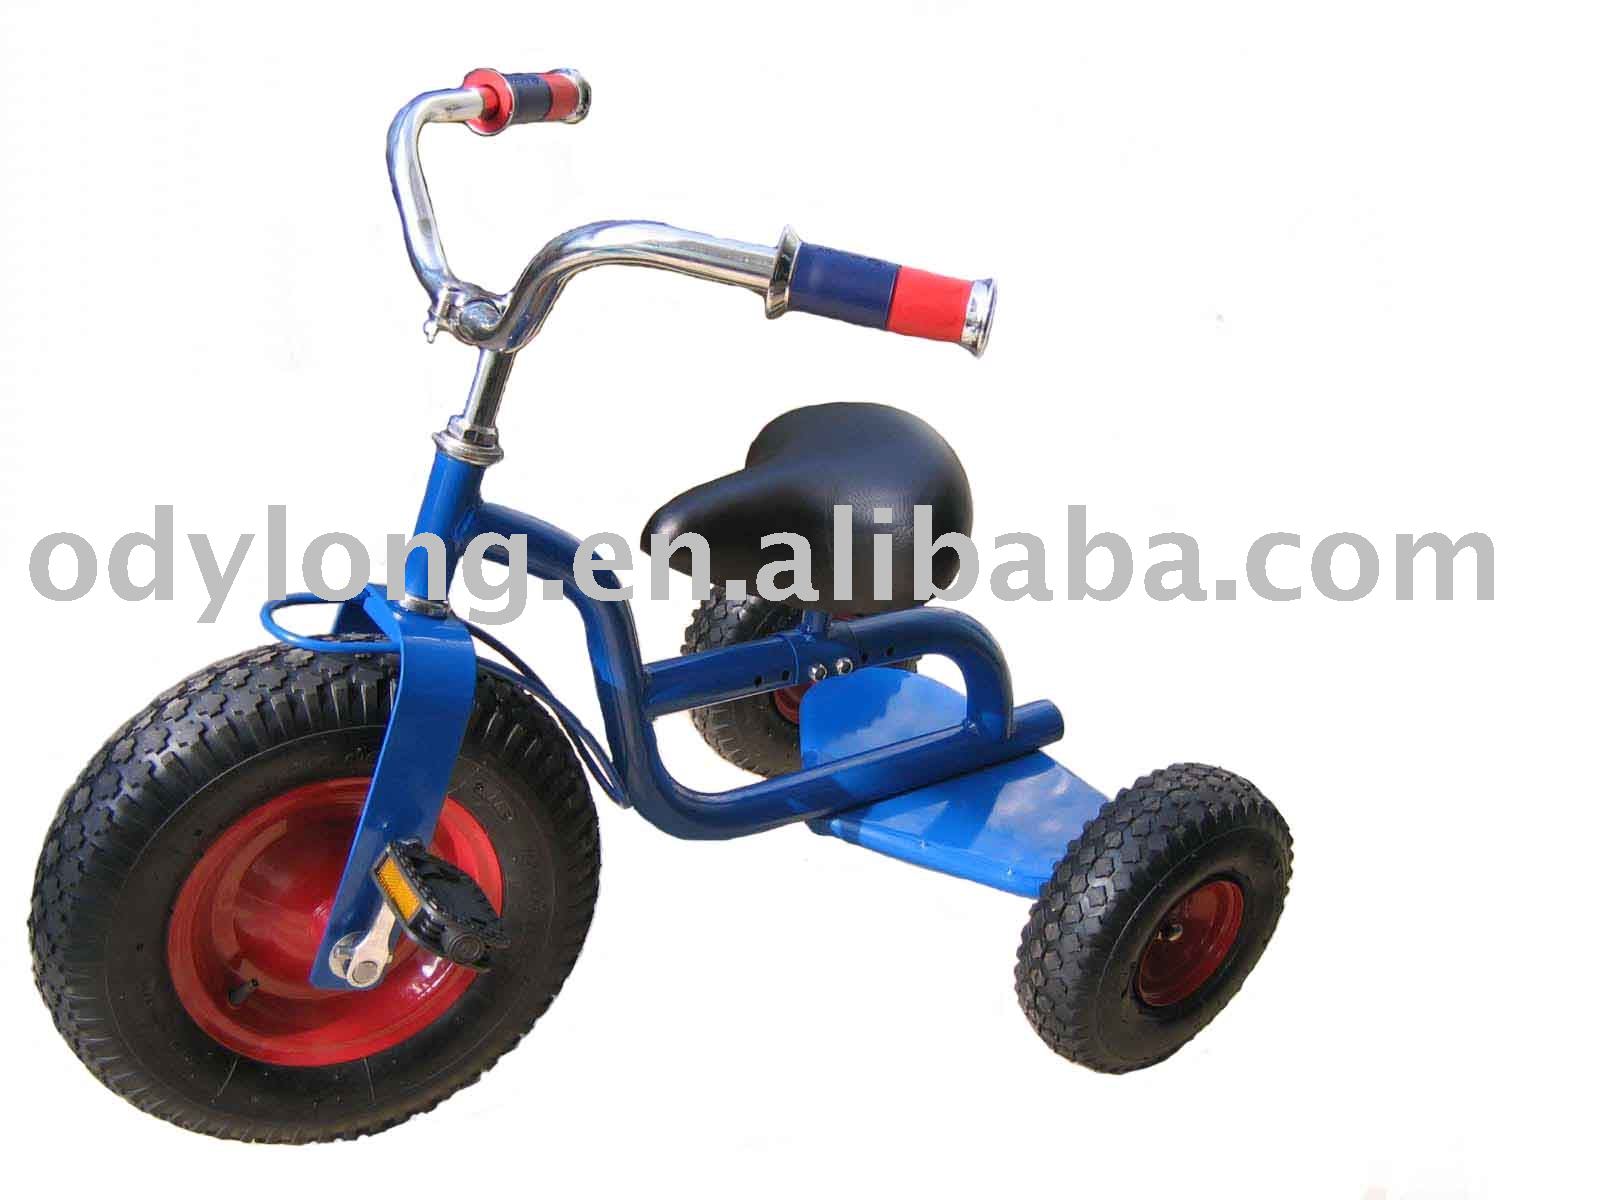 http://img.alibaba.com/photo/226753643/Children_Tricycles_children_buggy_Baby_Tricycle_kids_tricycle_toy_cart_CE_EEC_certificate_we_are_manufacturer.jpg